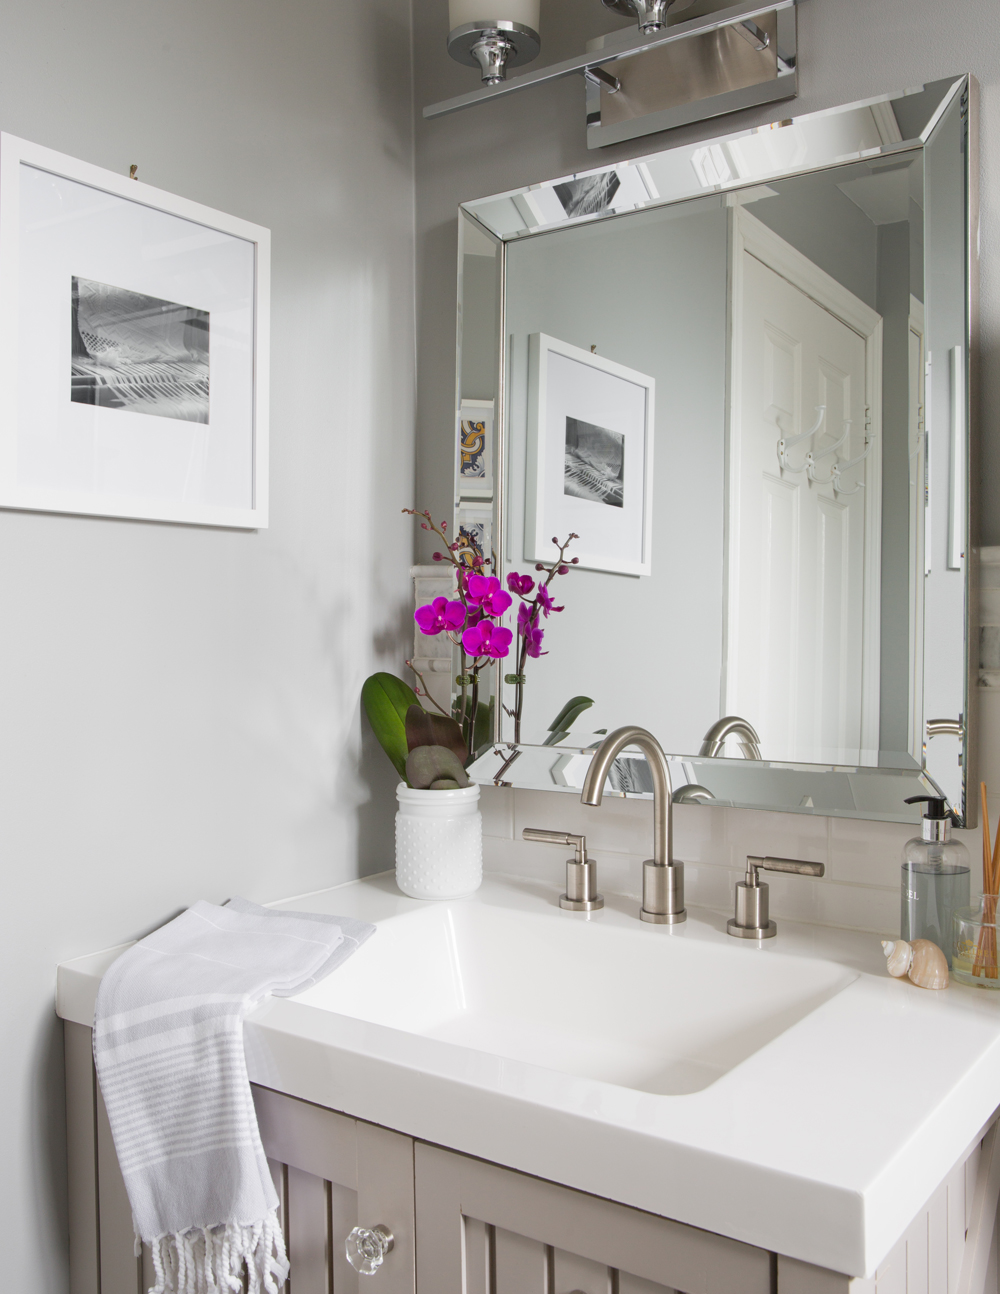 bathroom vanity with bevelled mirror, fuchsia orchid, black and white pic in white mat and frame